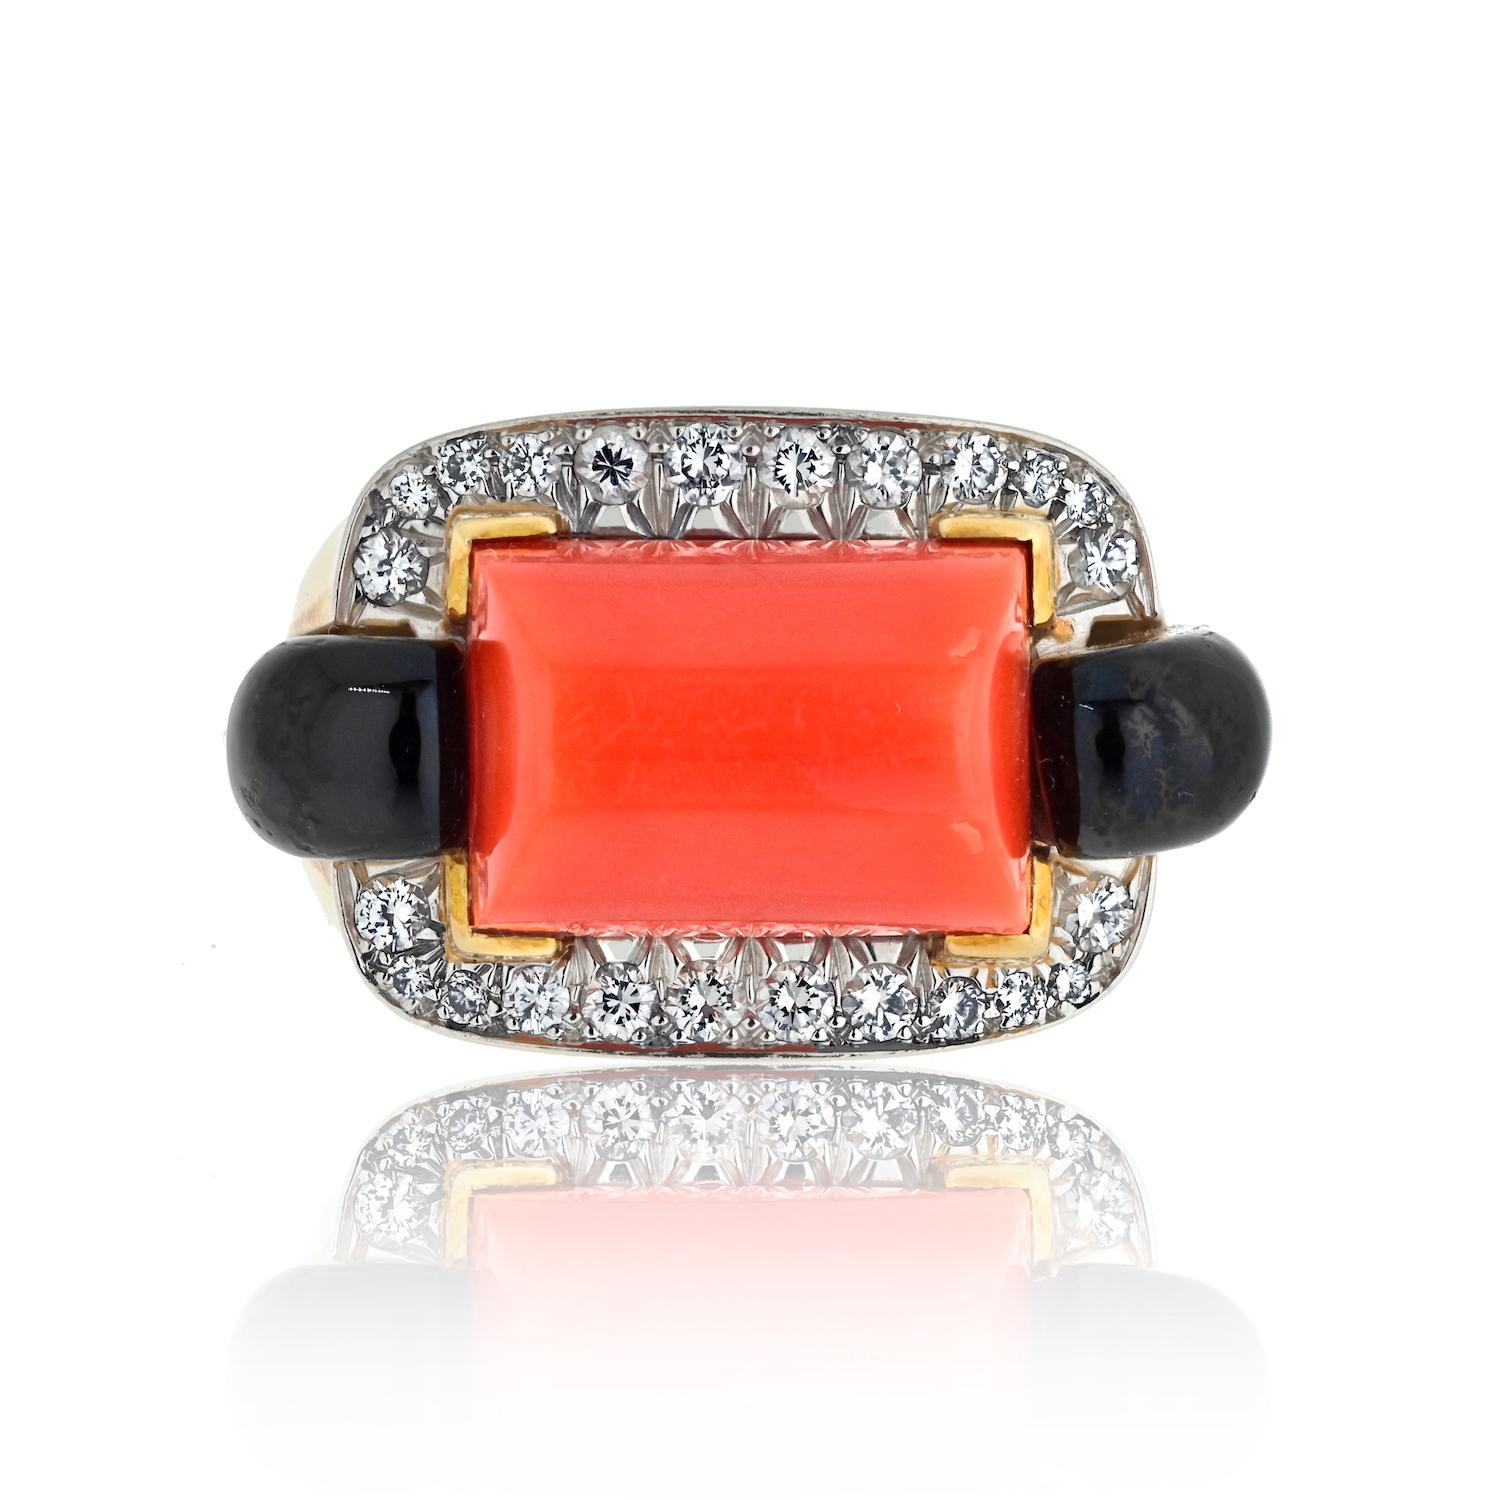 Indulge in the exquisite allure of this David Webb Platinum & 18K Yellow Gold Coral, Onyx, and Diamond Ring. The harmonious blend of vibrant coral and deep onyx creates a captivating contrast, accentuated by the brilliance of diamonds. 

Crafted